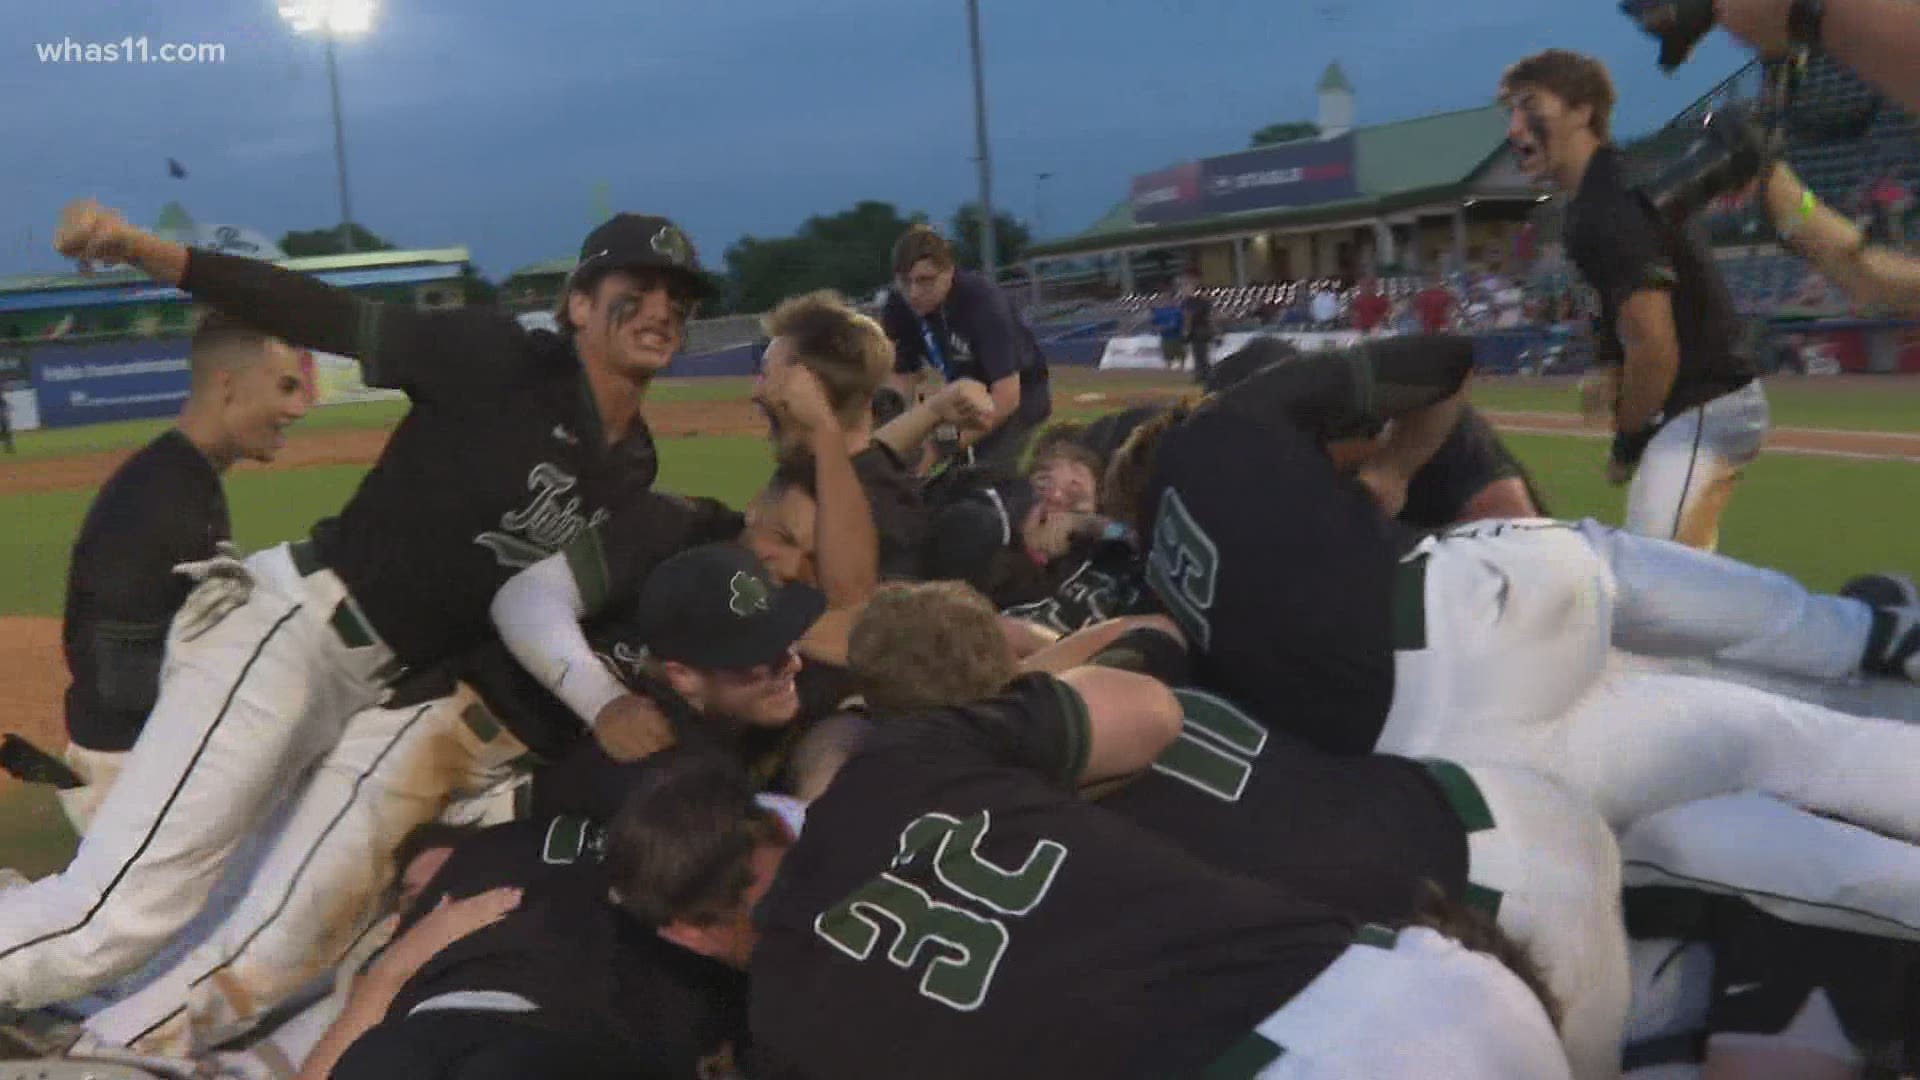 Trinity baseball has captured its first state title via run rule and finishes the season at 41-2. They beat McCracken County 10-0.